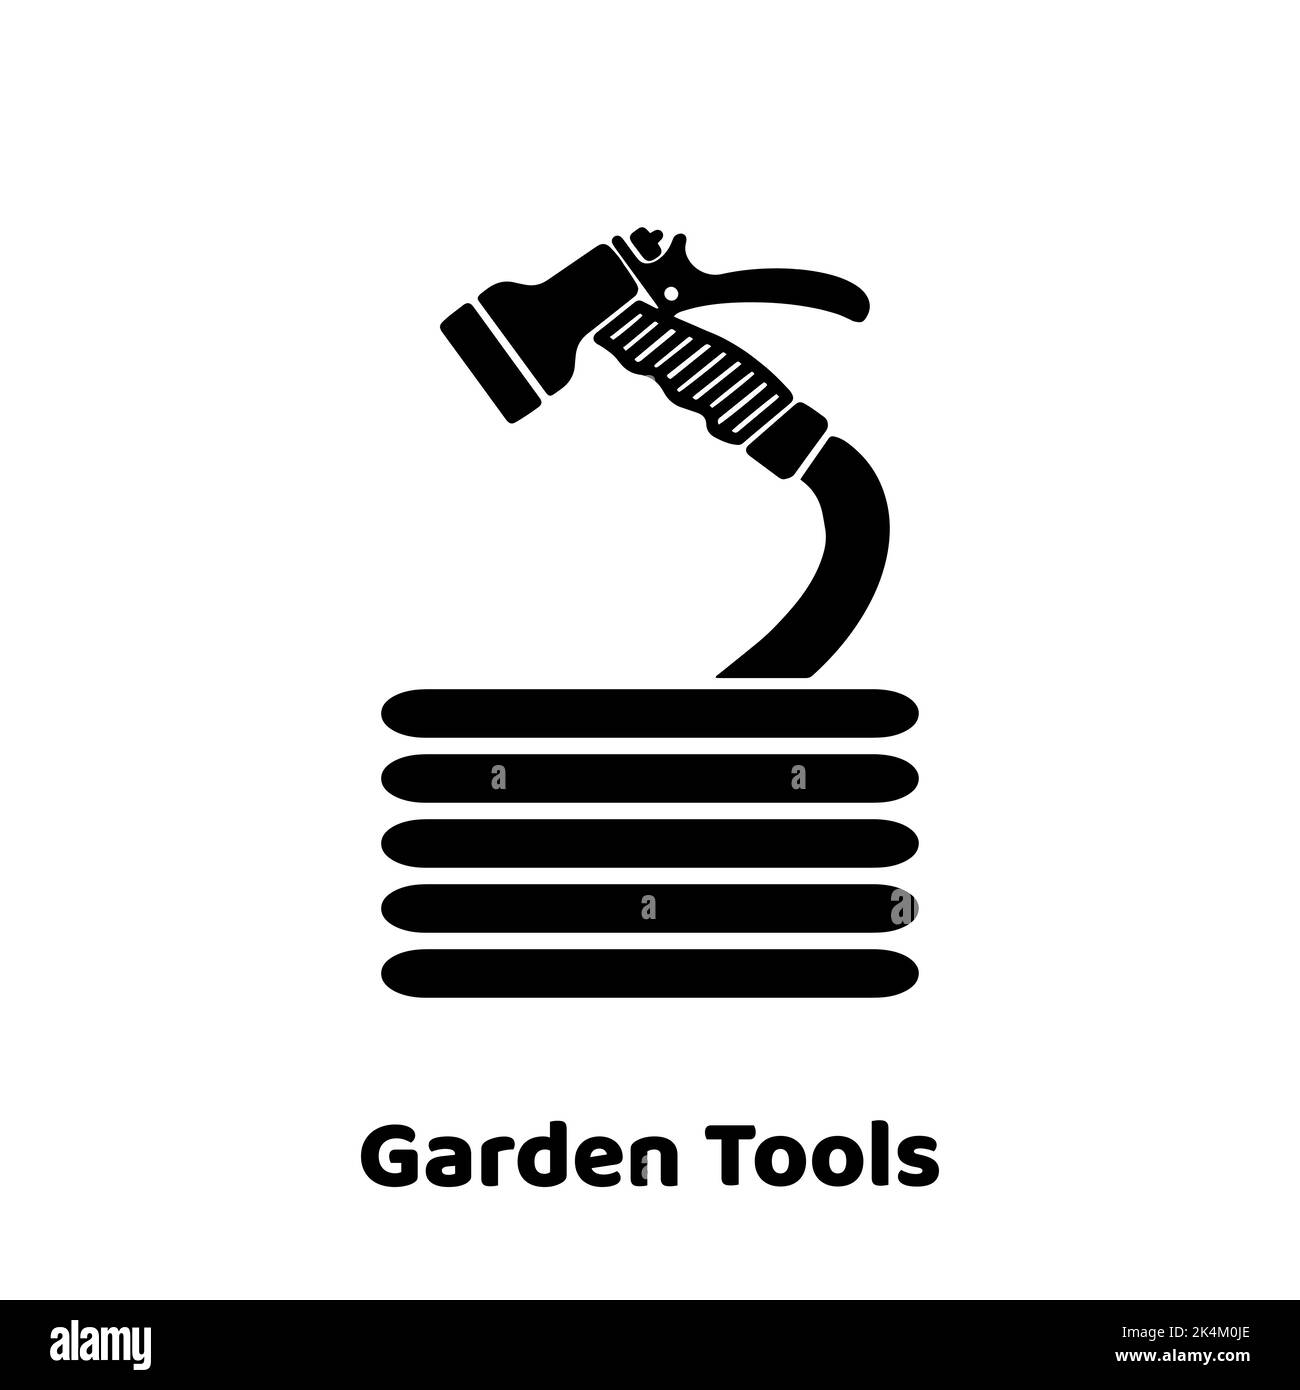 Watering hose icon. Advertisement for garden tools. Moisture saturation of the earth. Isolated on white background. Vector Stock Vector